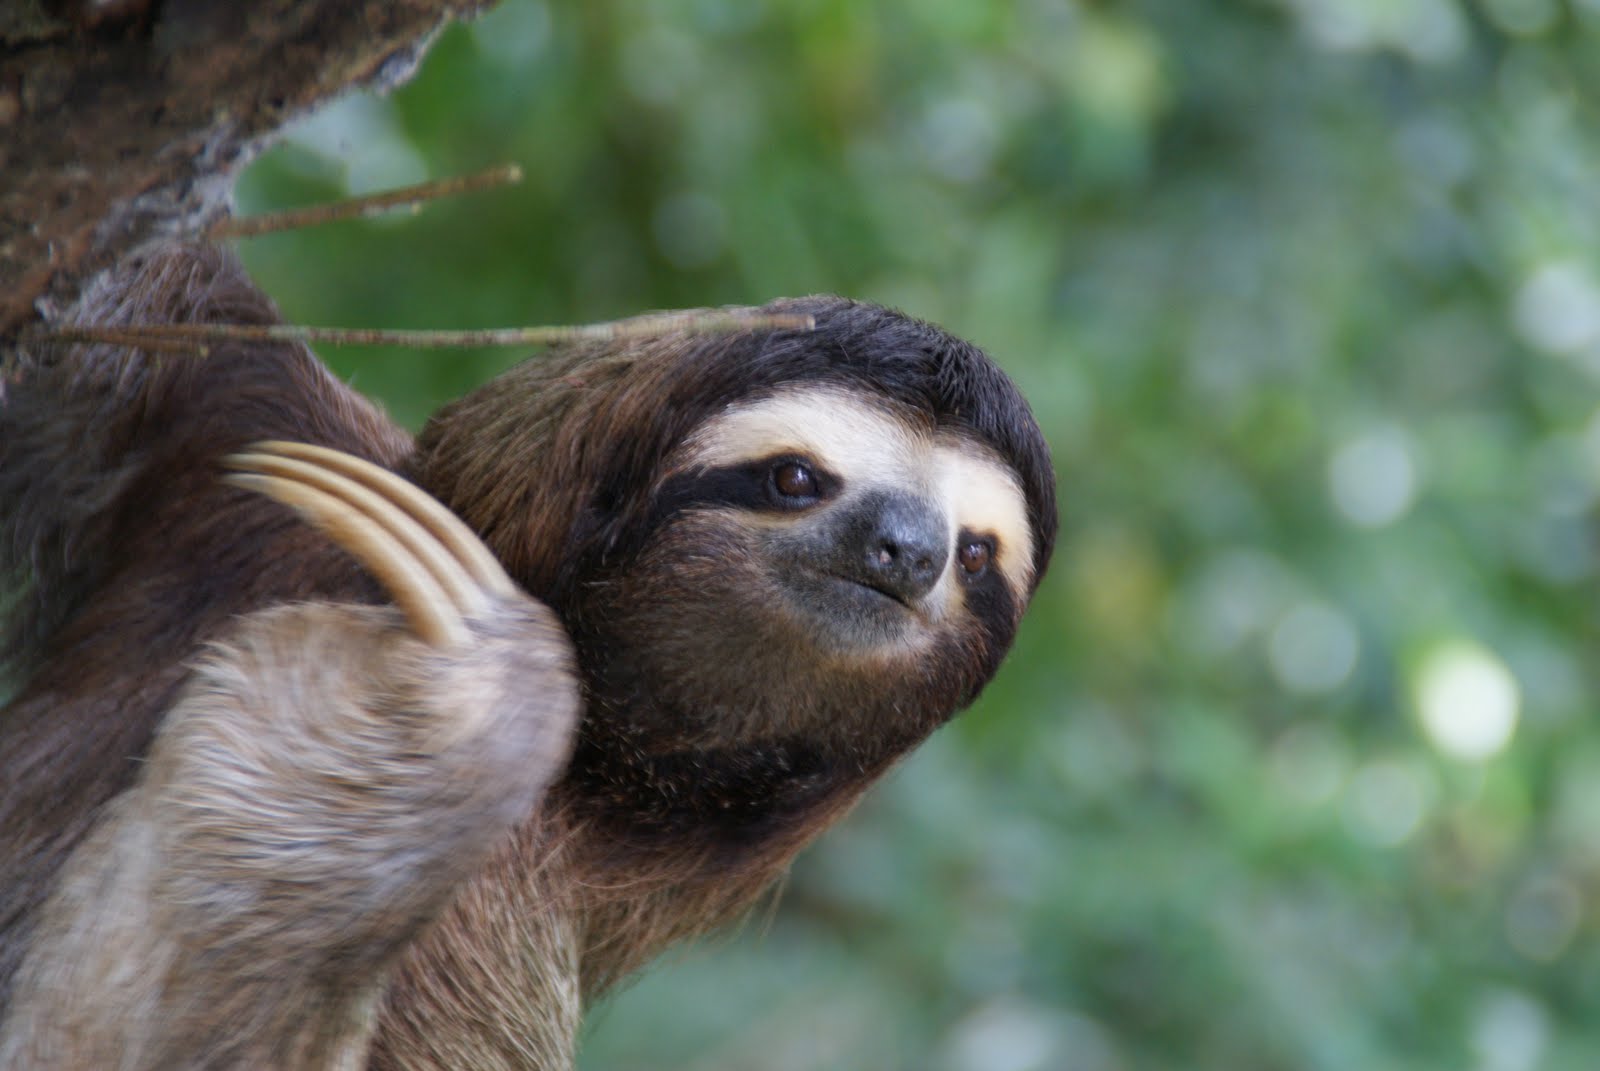 Toed Sloth Brown Throated HD Wallpaper Jpg Pictures